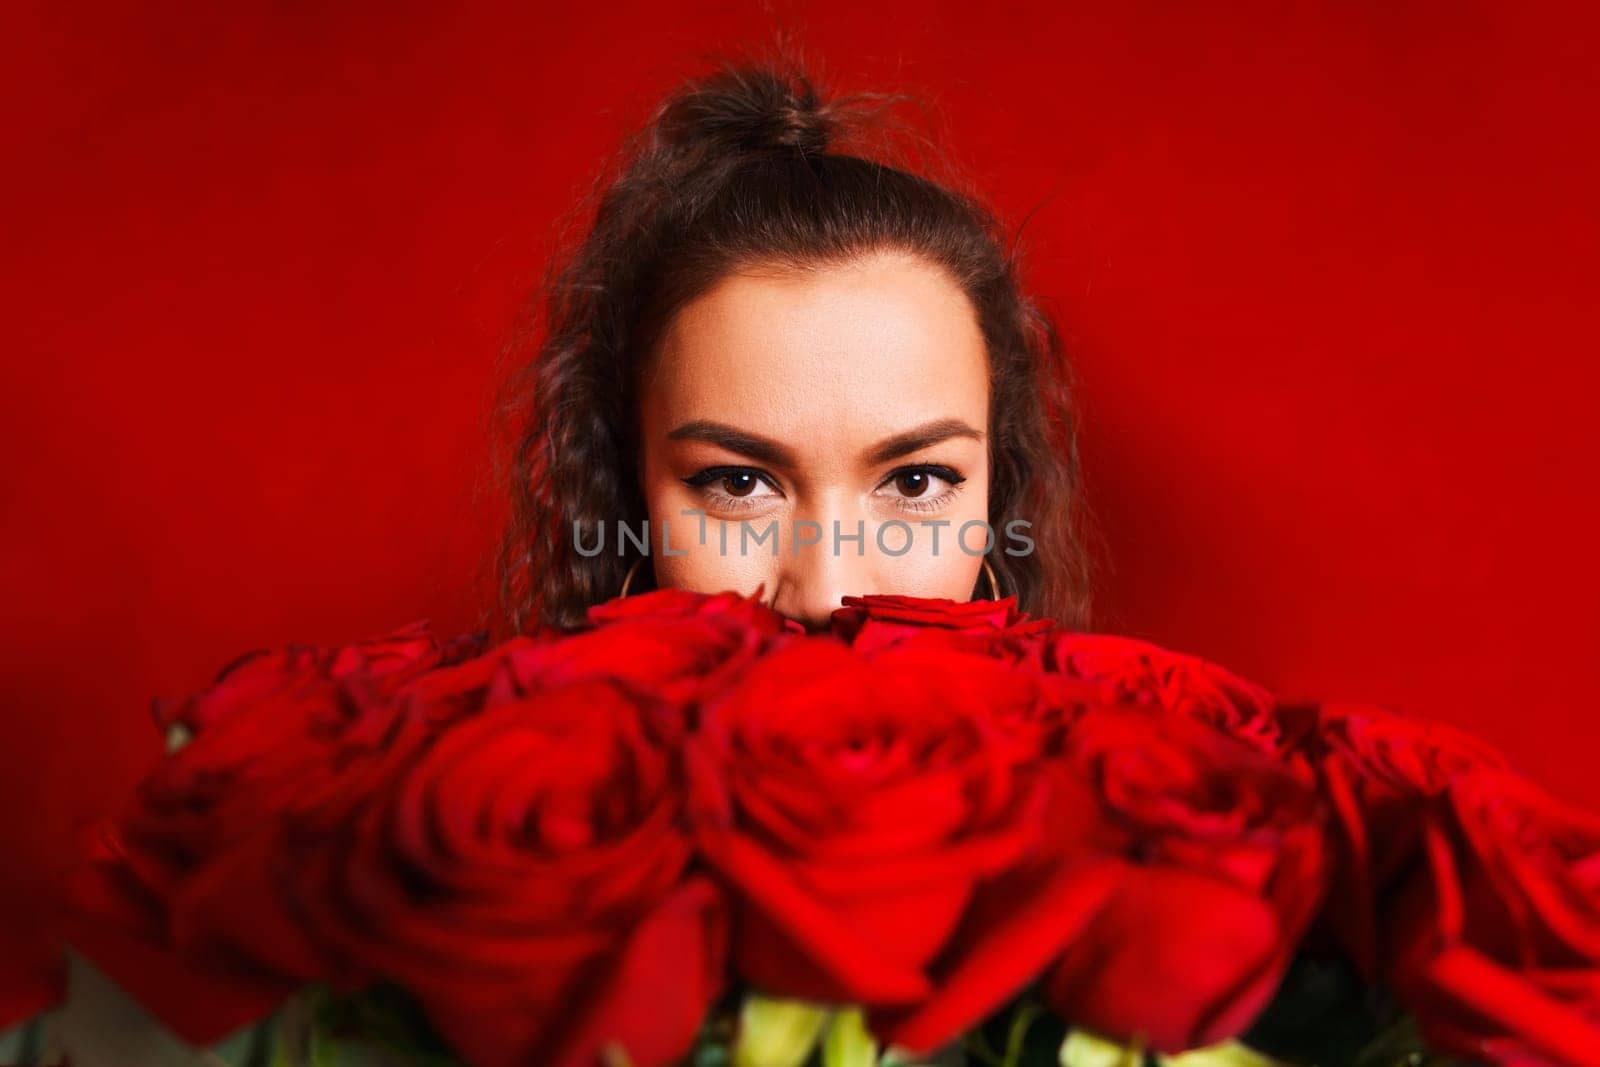 Portrait of girl peeking out from behind bouquet of flowers on red background. Portrait of girl peeks out from behind bouquet of flowers on red background. Young woman holding large bouquet red roses